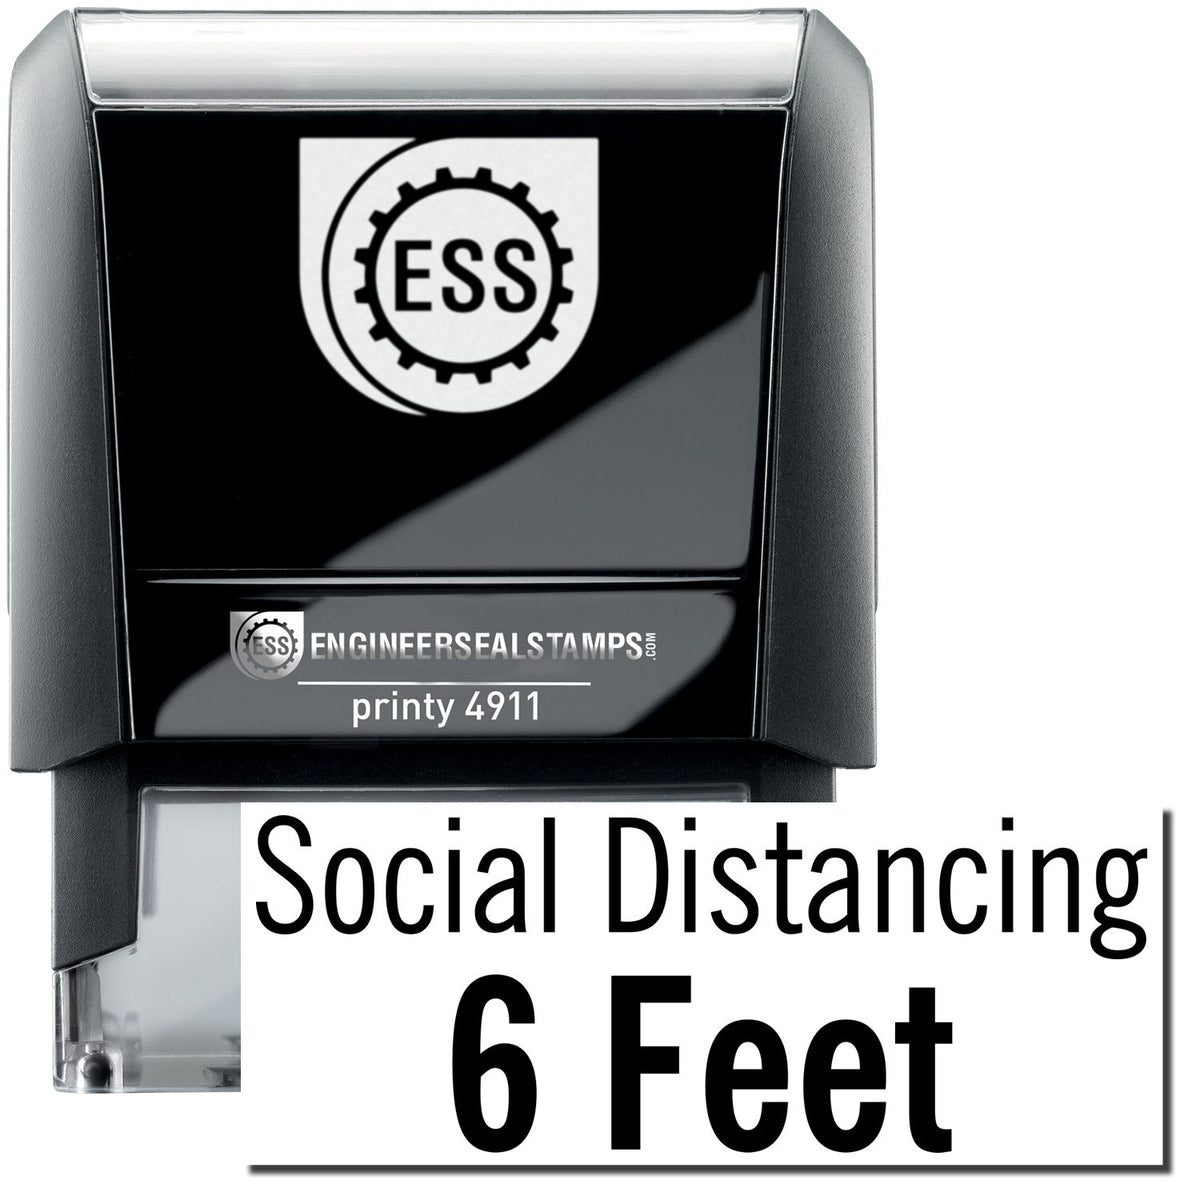 A self-inking stamp with a stamped image showing how the text &quot;Social Distancing 6 Feet&quot; is displayed after stamping.